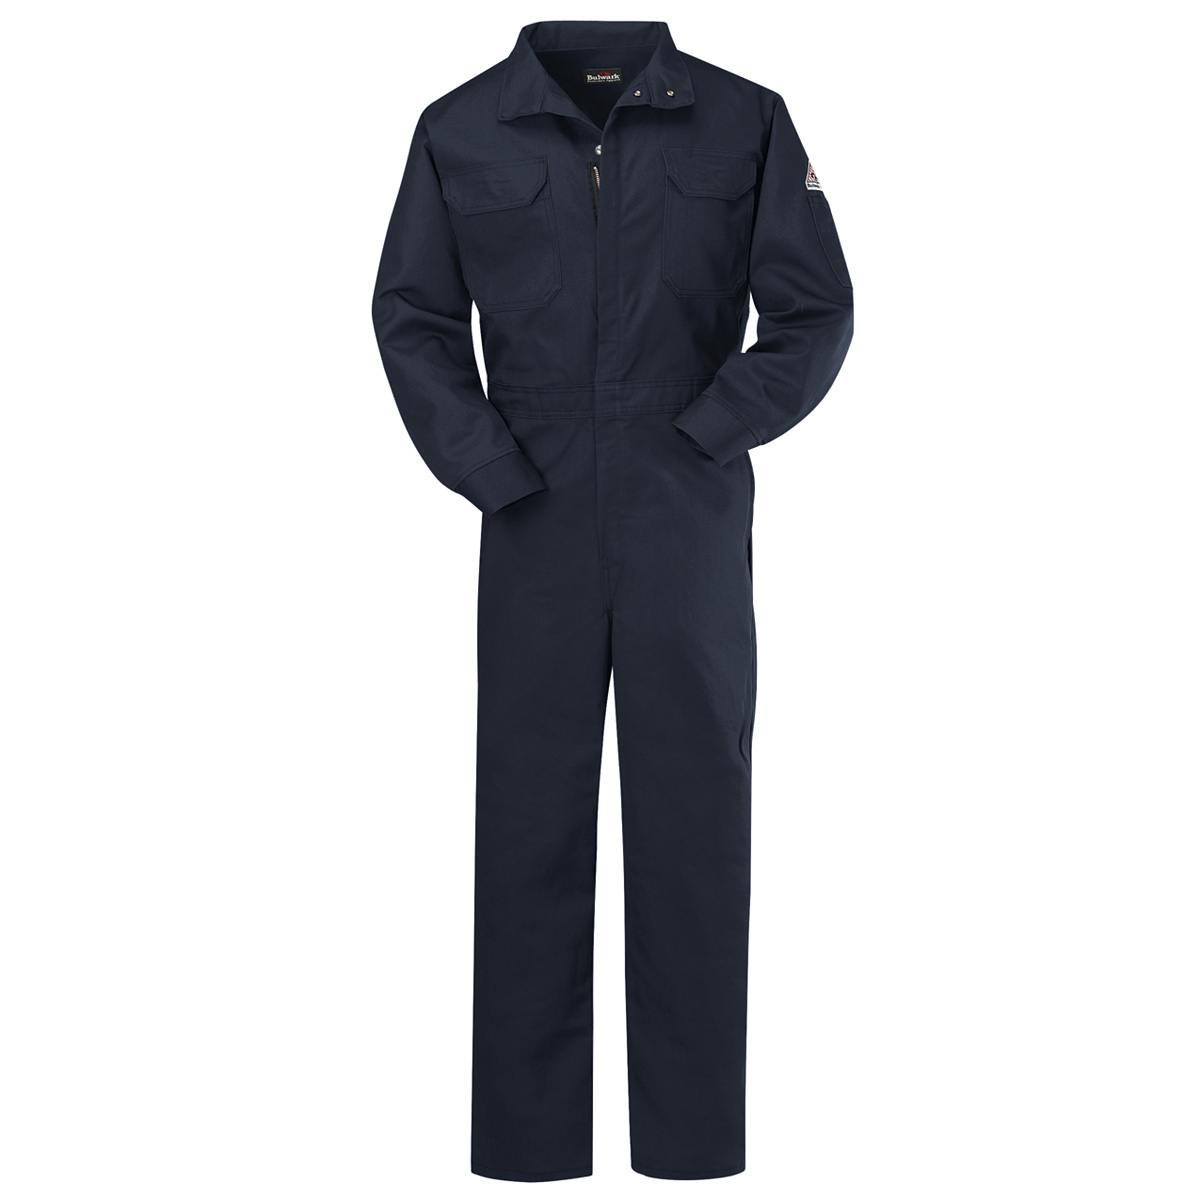 Bulwark® 44 Tall Navy Blue Westex Ultrasoft® Twill/Cotton/Nylon Flame Resistant Coveralls With Zipper Front Closure